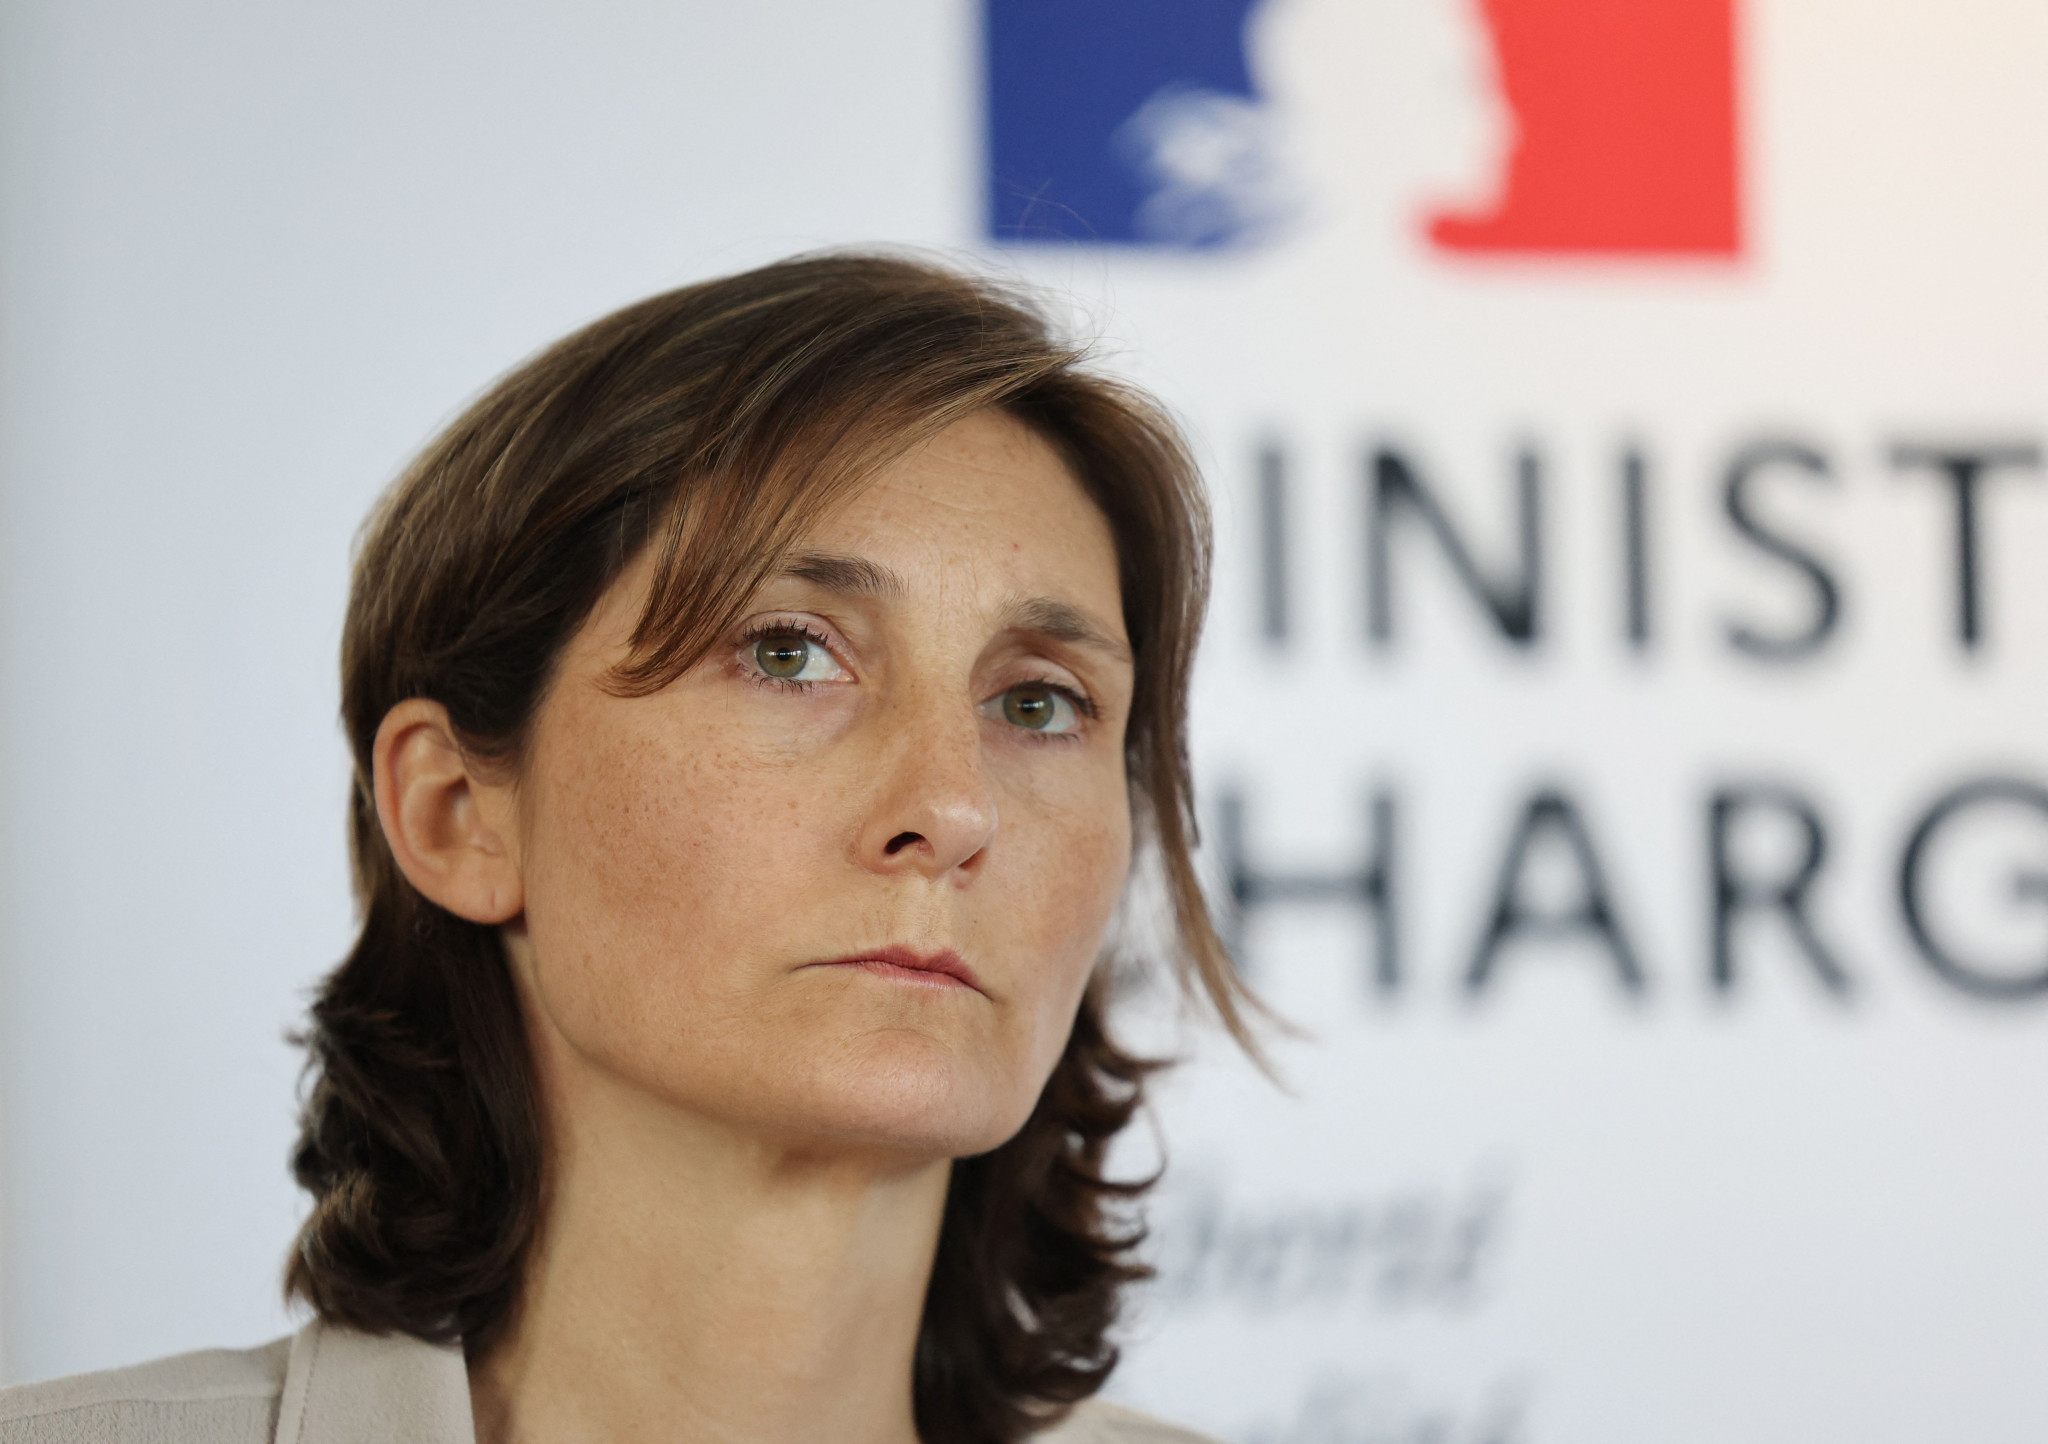 French Sports Minister Amélie Oudéa-Castéra could not convince Bernard Laporte to permanently step down as FFR President and has begun the process to find a temporary replacement ©Getty Images